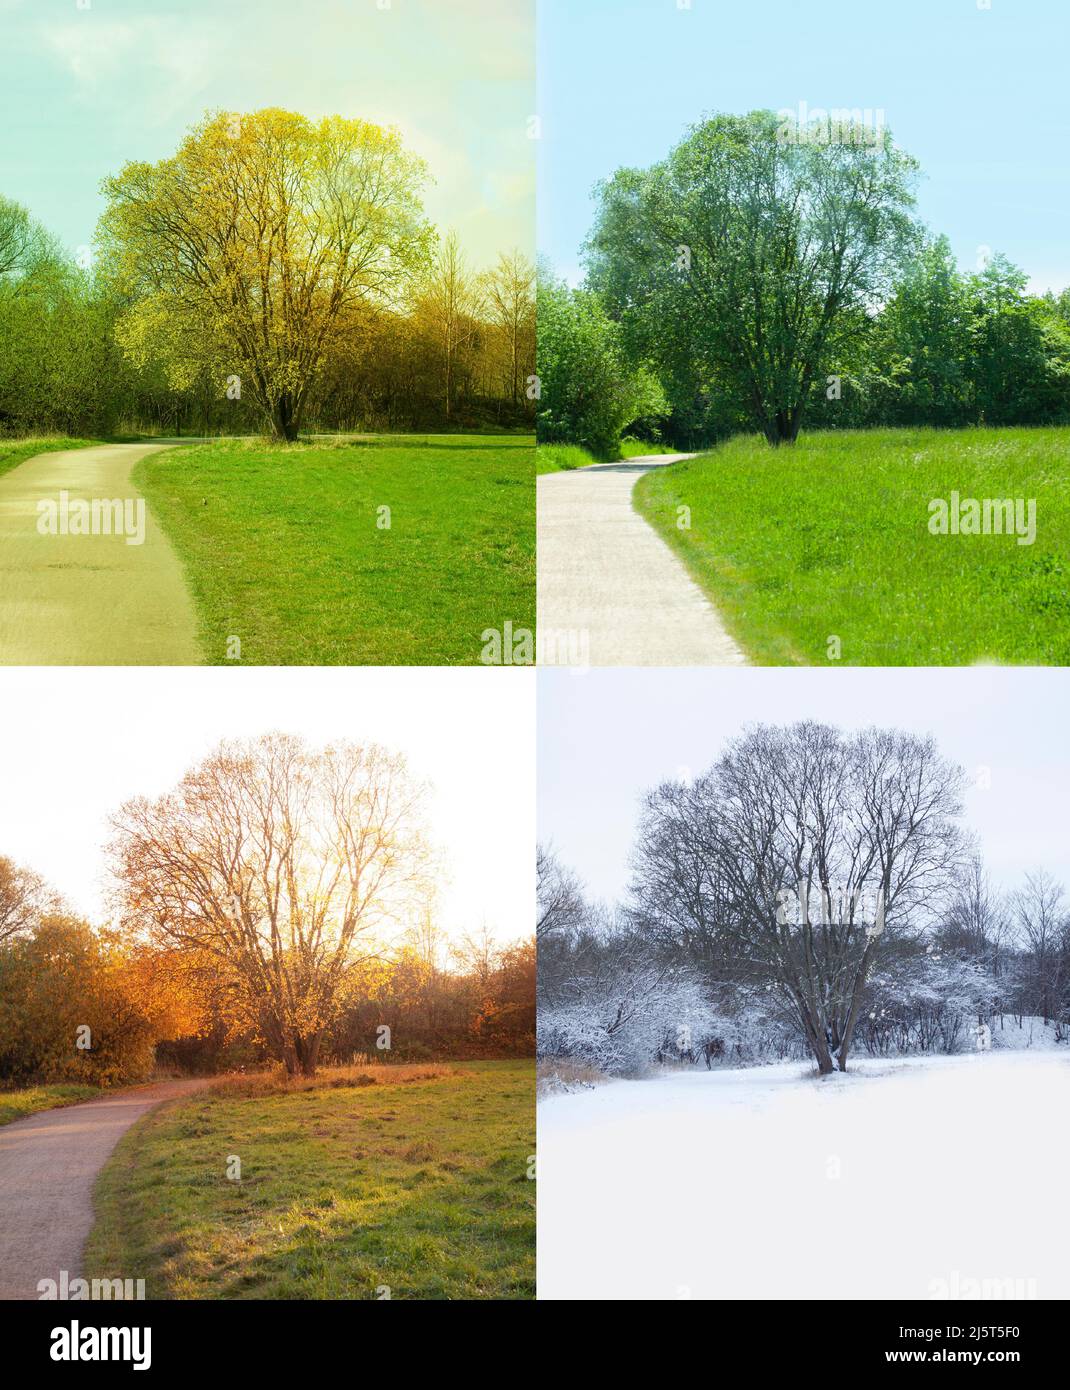 Tree in nature showing all Four Seasons - spring, summer, autumn and winter in colmbined images. Stock Photo